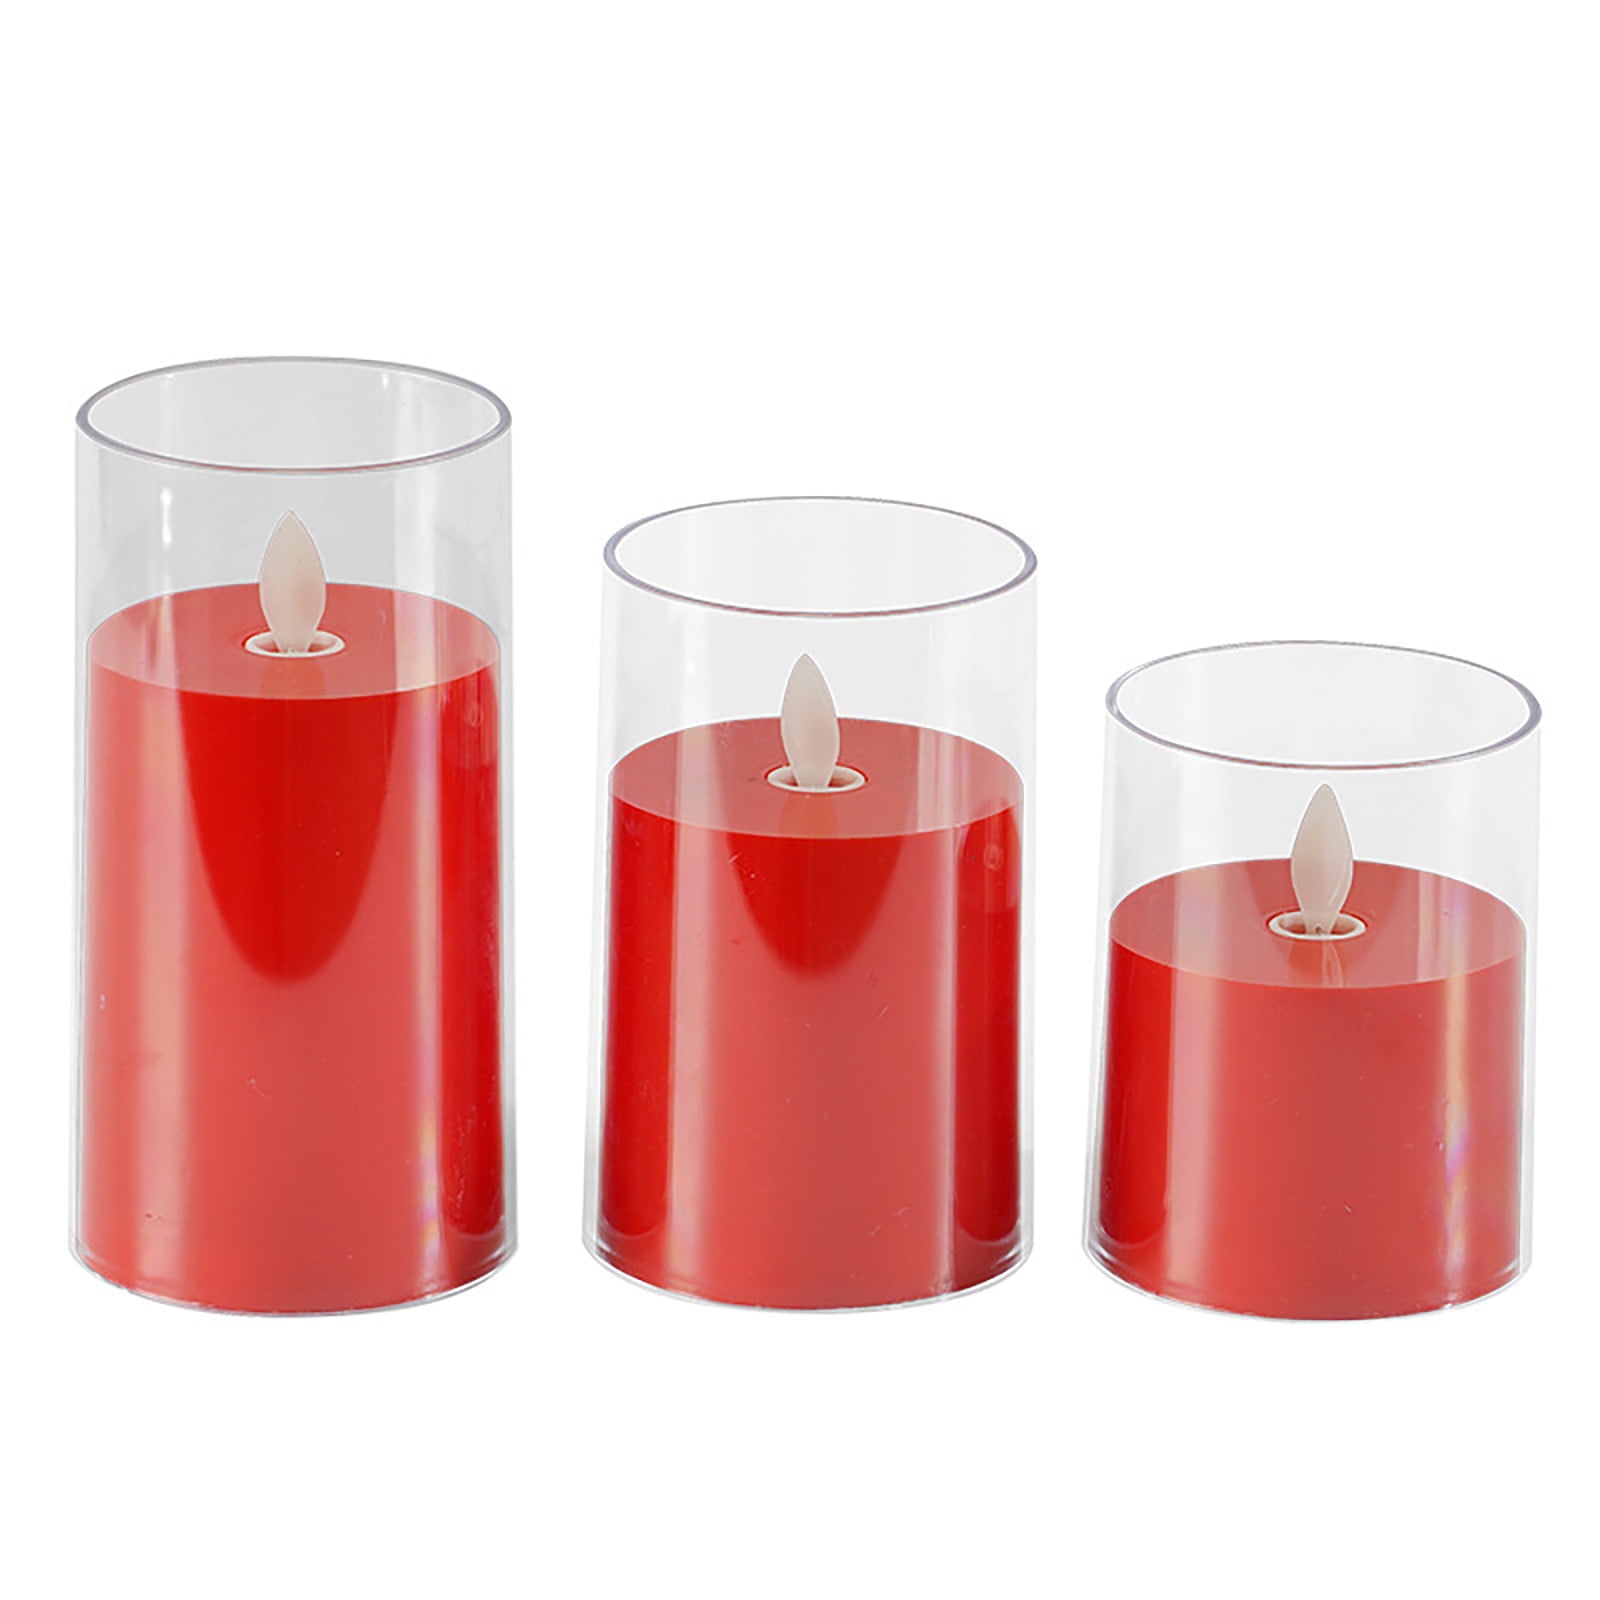 Henpk Clearance Under 5 Christmas Lights Red Flameless Candle, Wick ...